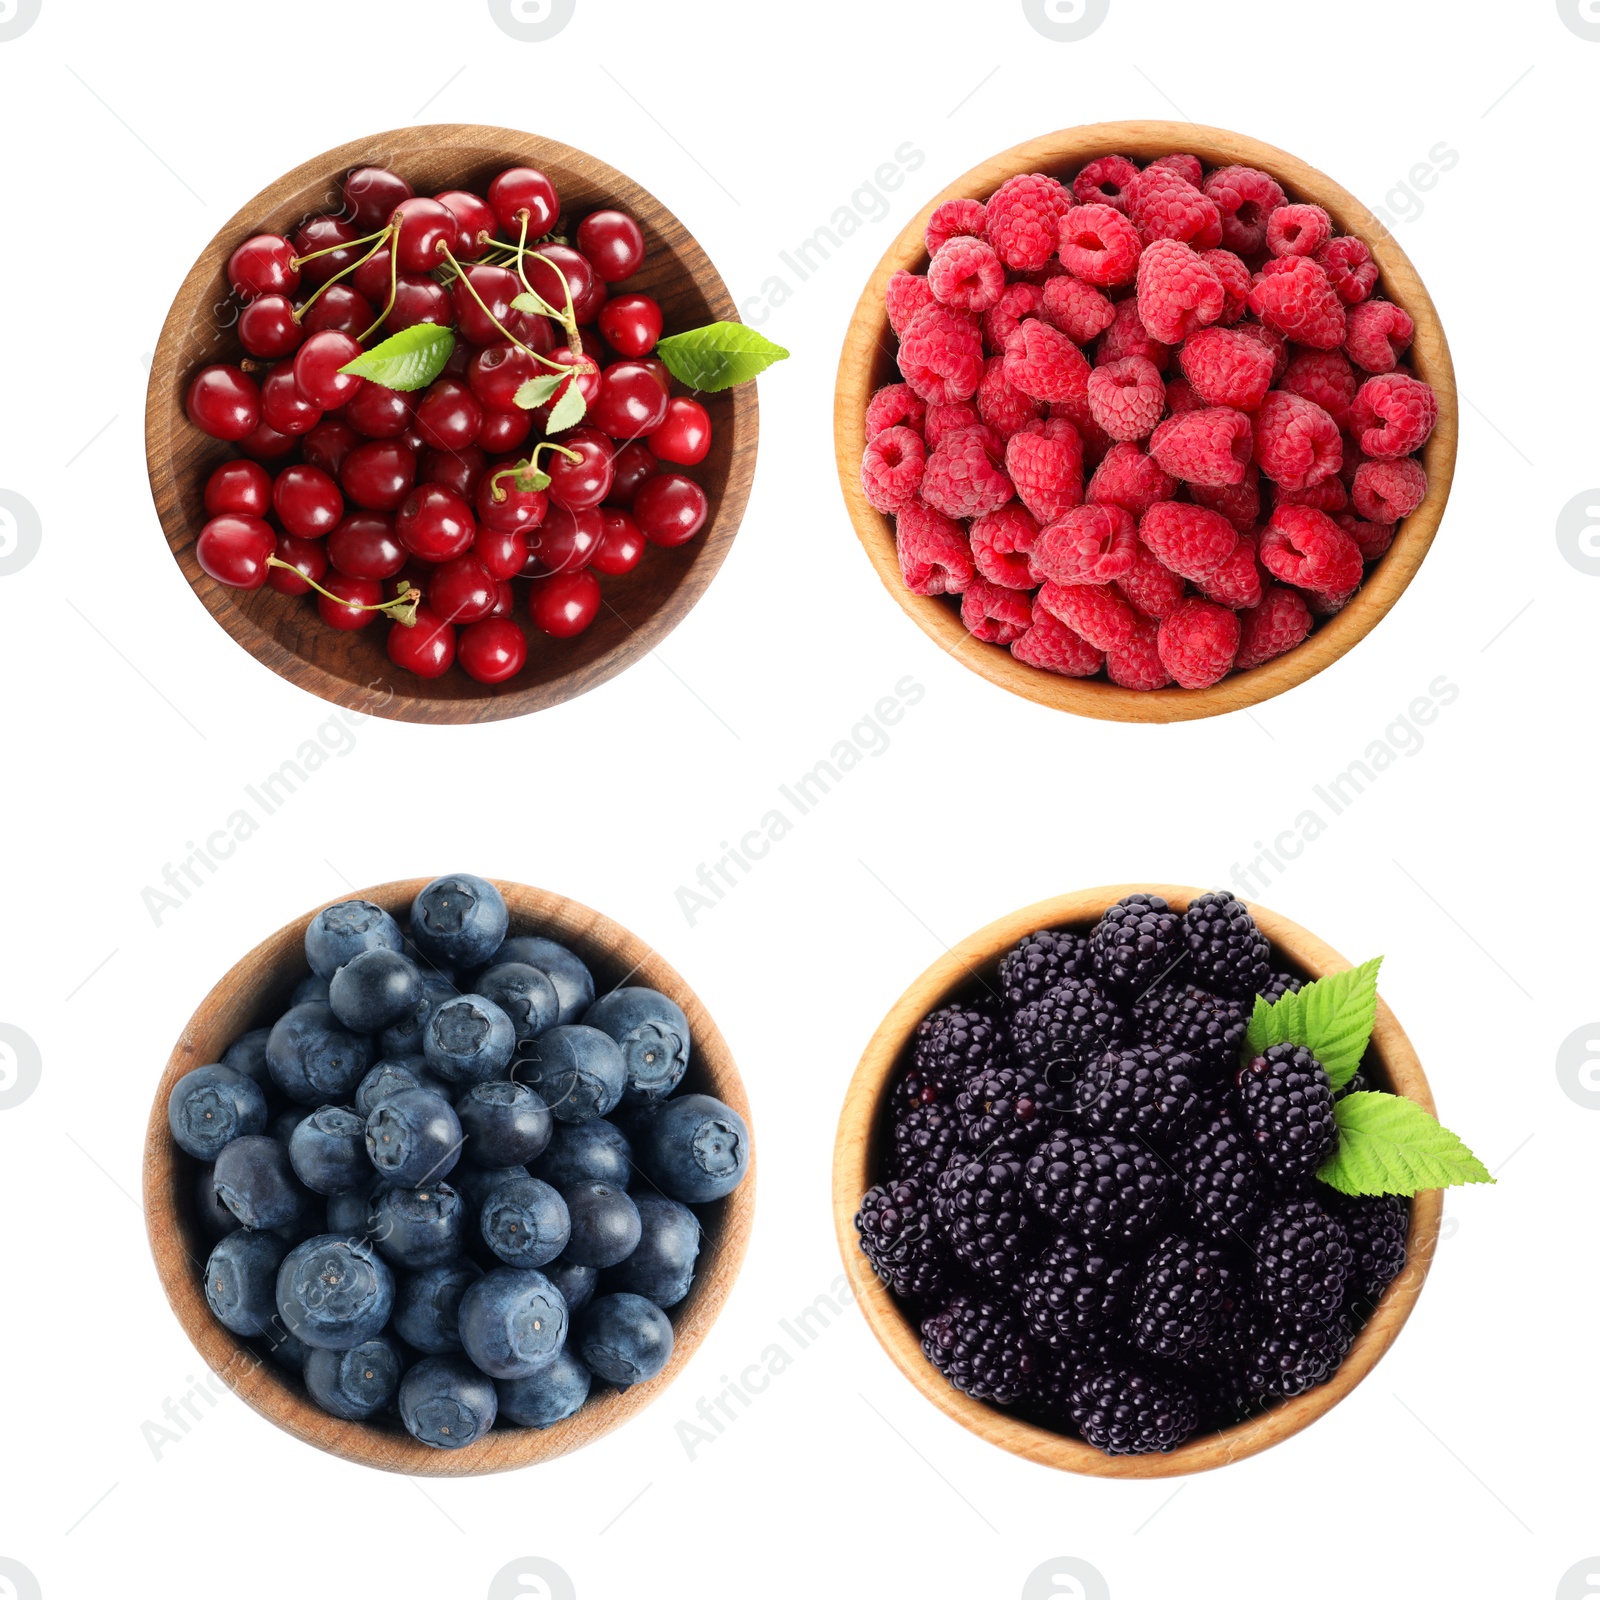 Image of Set of bowls with different fresh berries on white background, top view